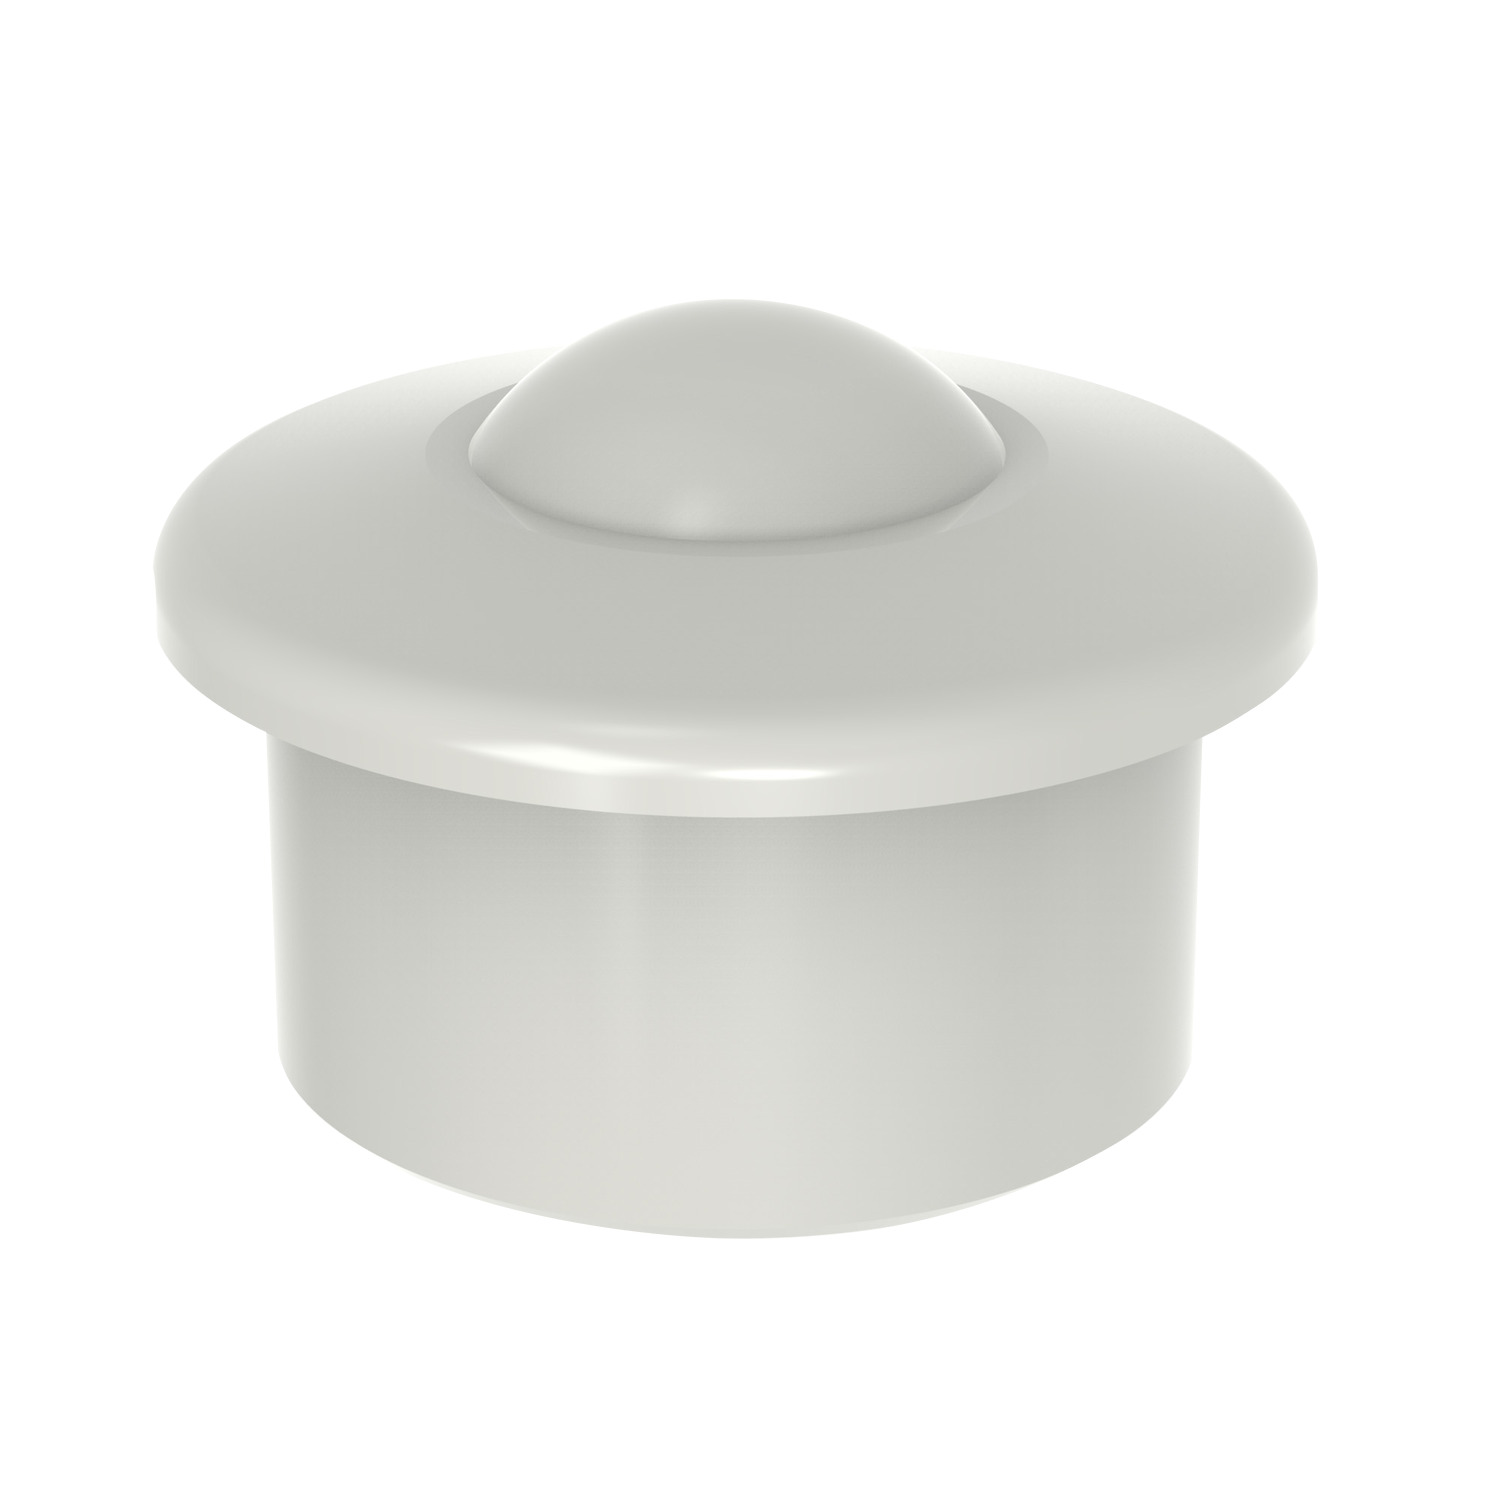 Acetal Body Ball Transfer Units Push fit units. These acetal units resist salt water and chemicals. They are non-conductive and non-magnetic.